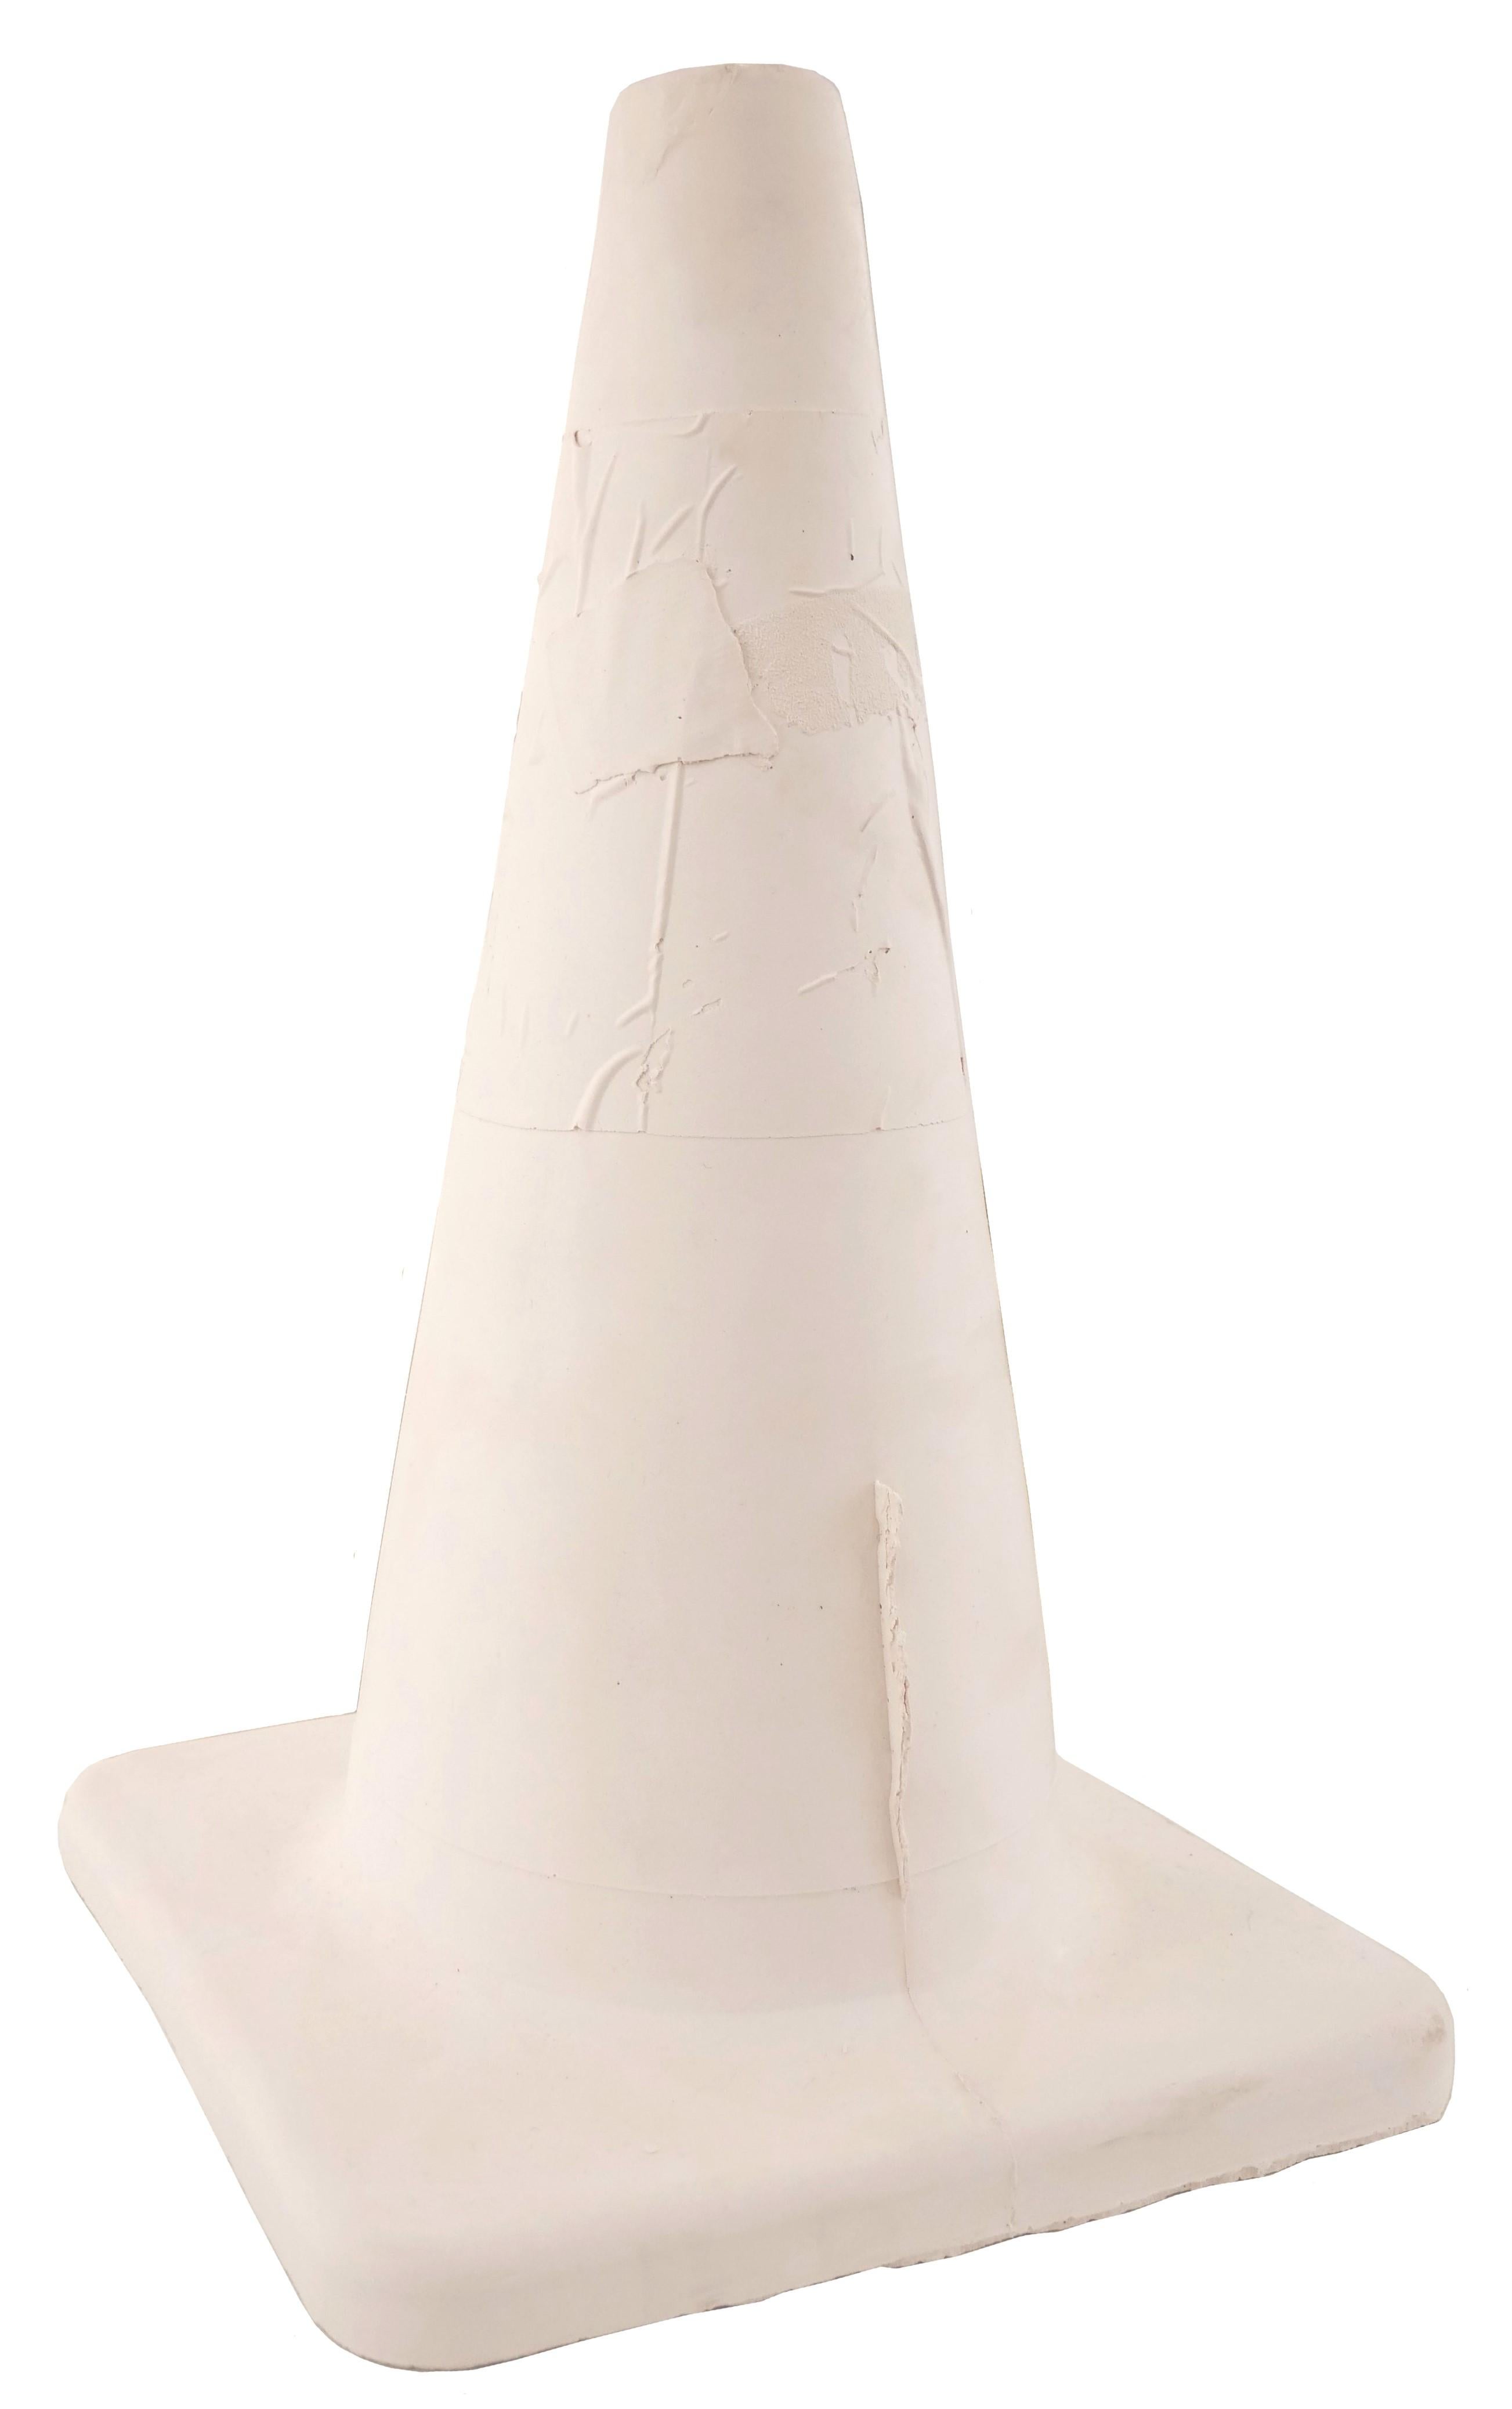 Benji Stiles Abstract Sculpture - "Untitled (Traffic Cone)" Contemporary Pastel Plaster Hyperrealist Sculpture